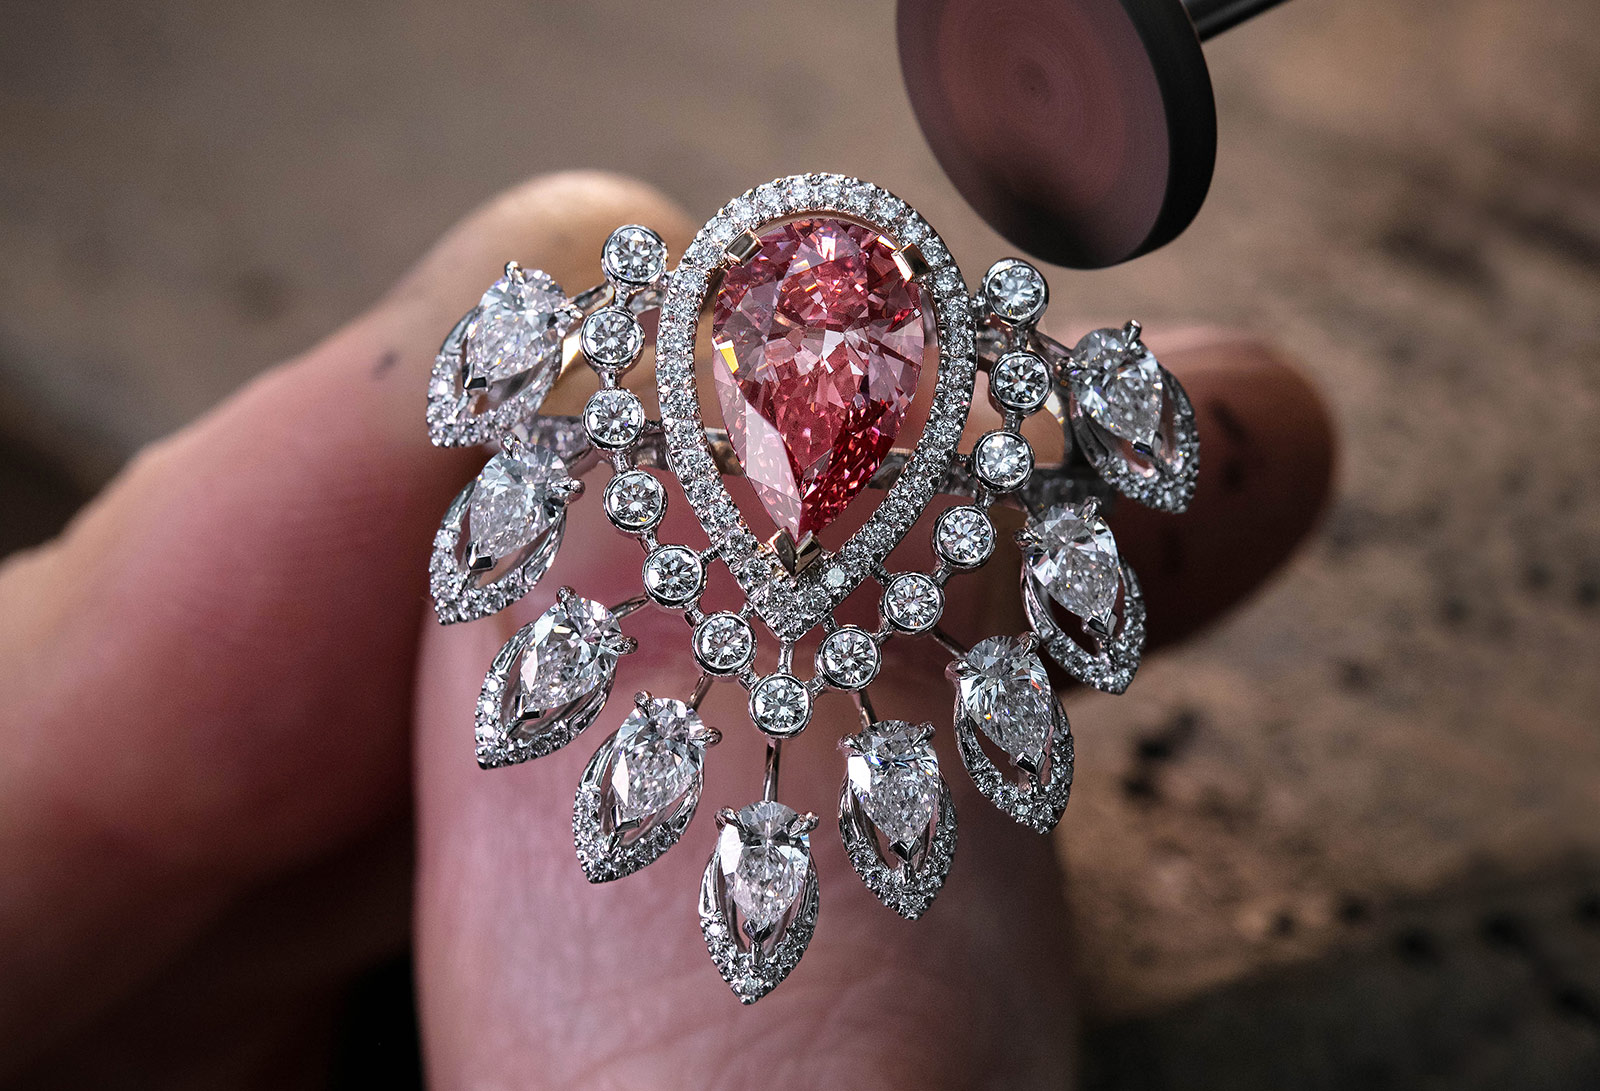 Messika 'Private Collection' 'Desert Bloom' ring with 1.62ct pear cut fancy intense pink diamond, accenting pear and brilliant cut colourless diamonds in white gold